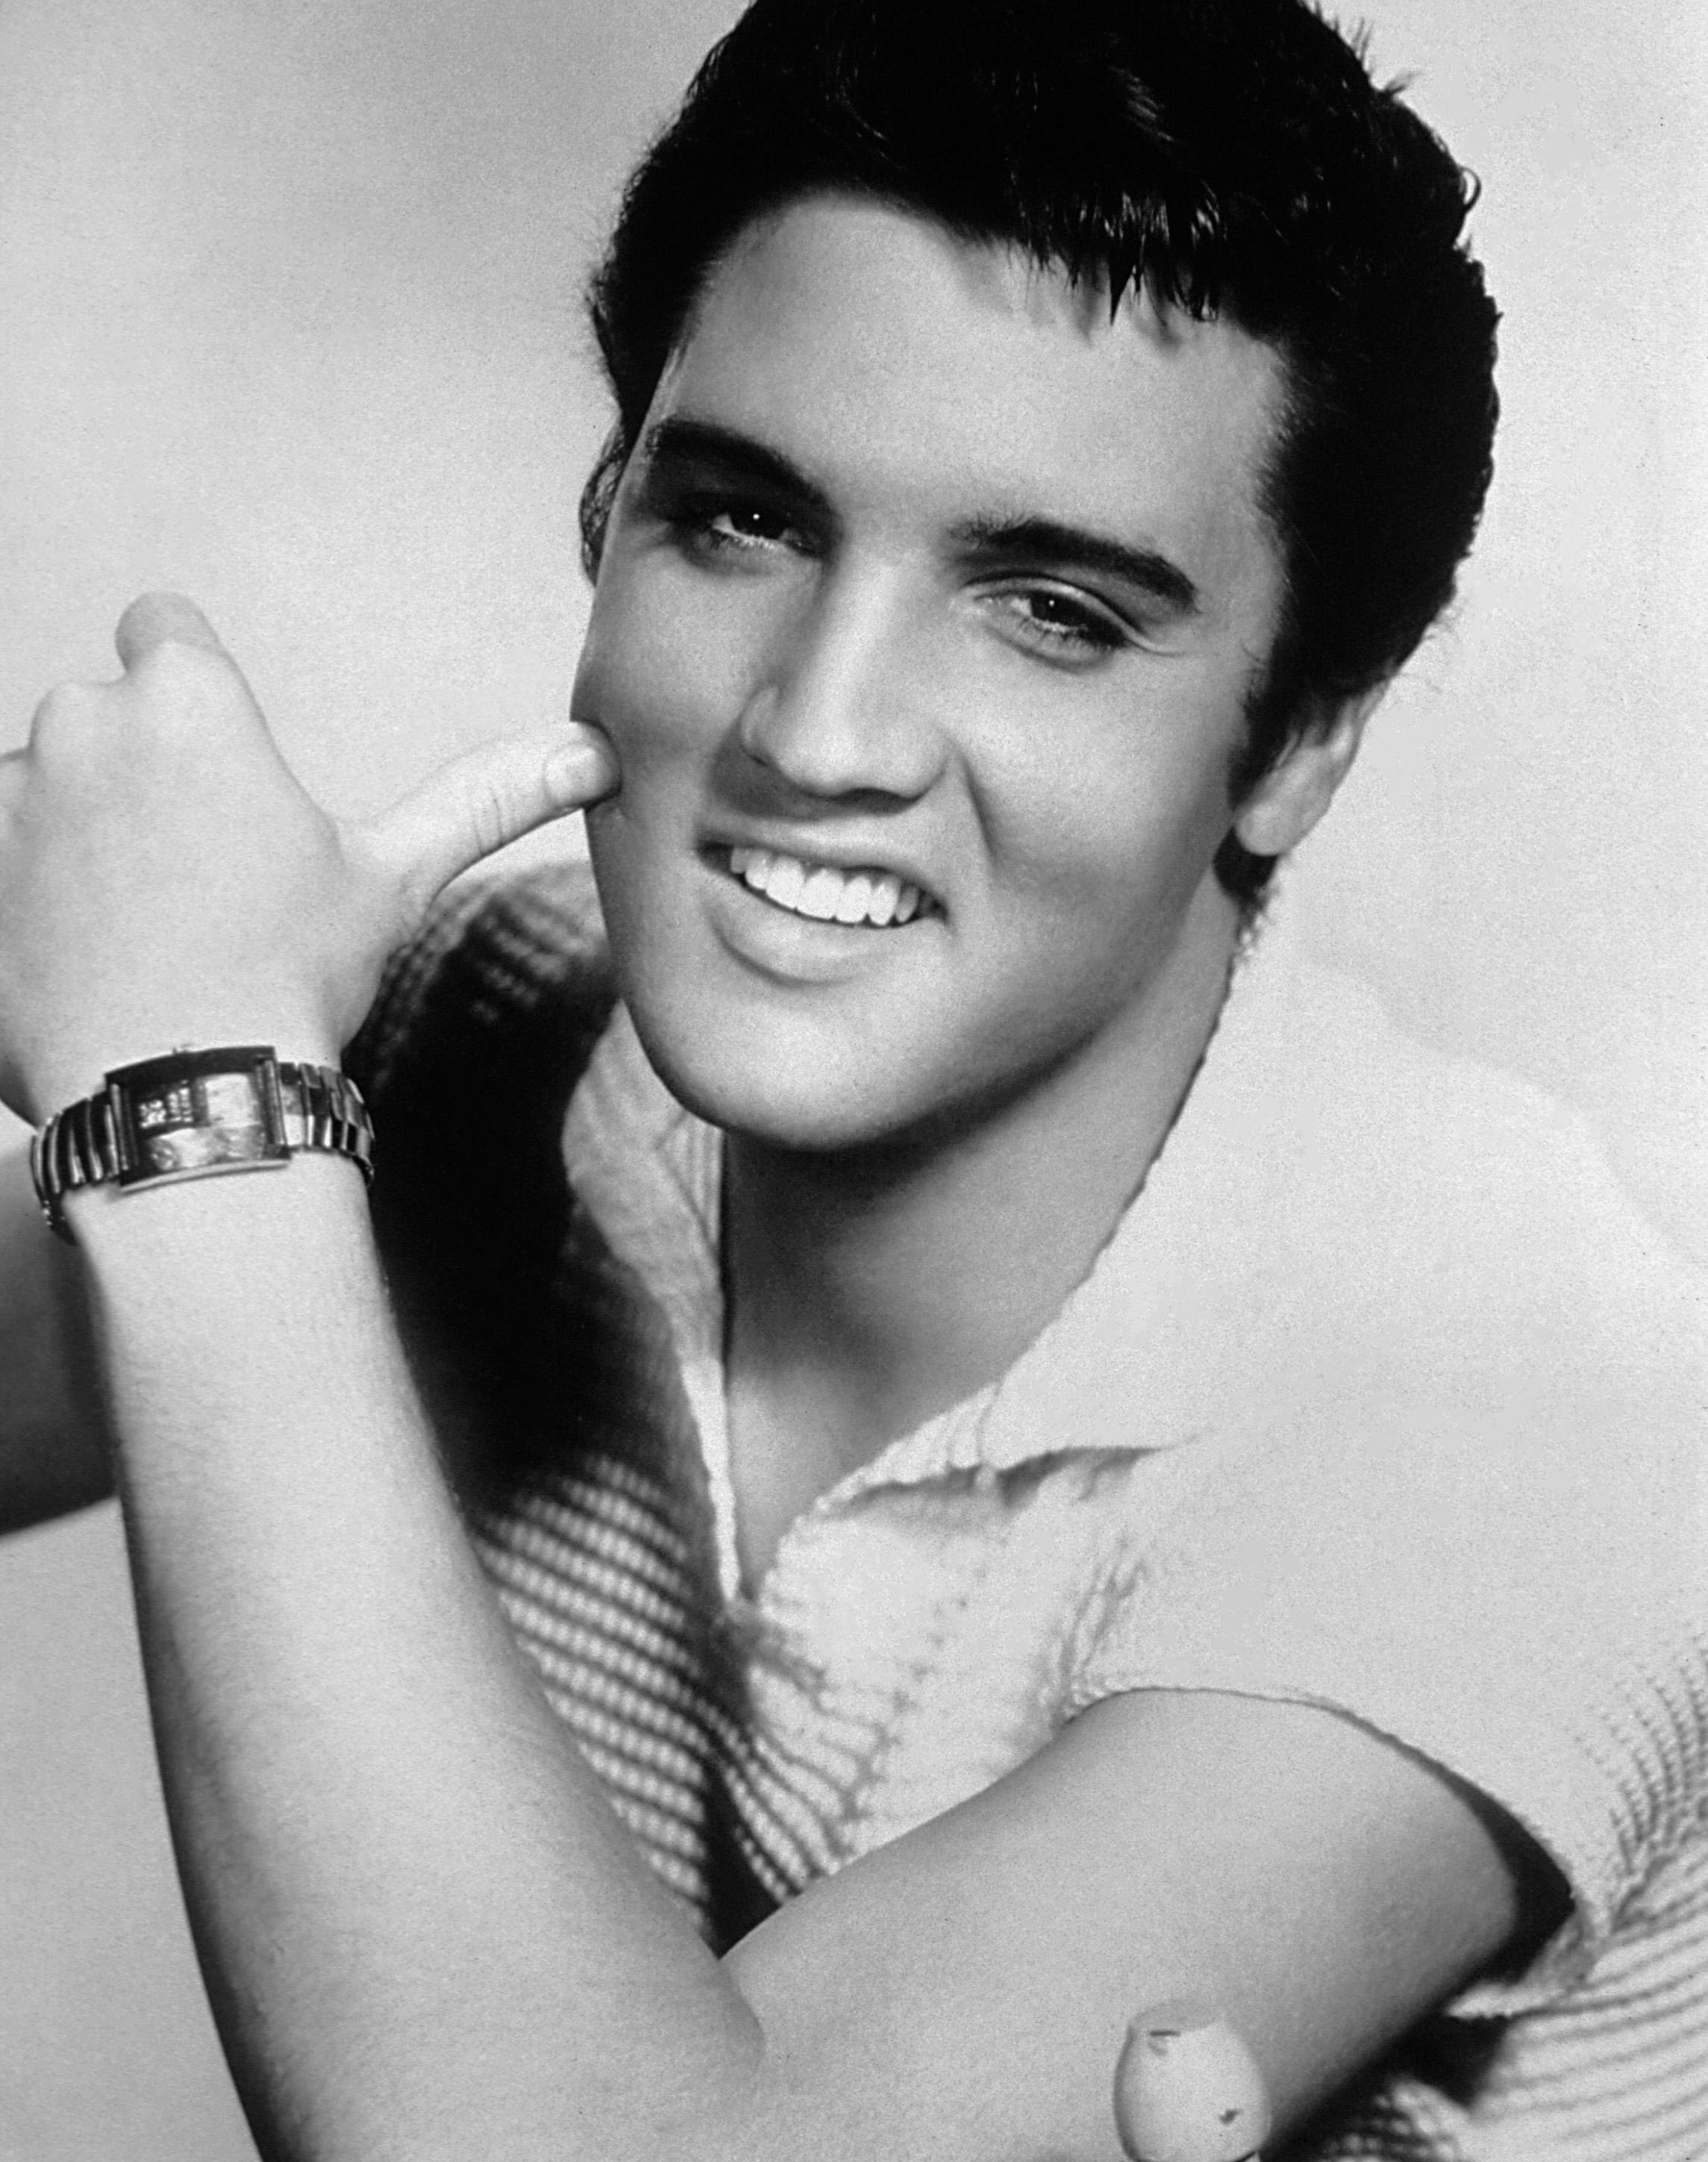 Unknown Black and White Photograph - Young Elvis Presley Smiling Globe Photos Fine Art Print